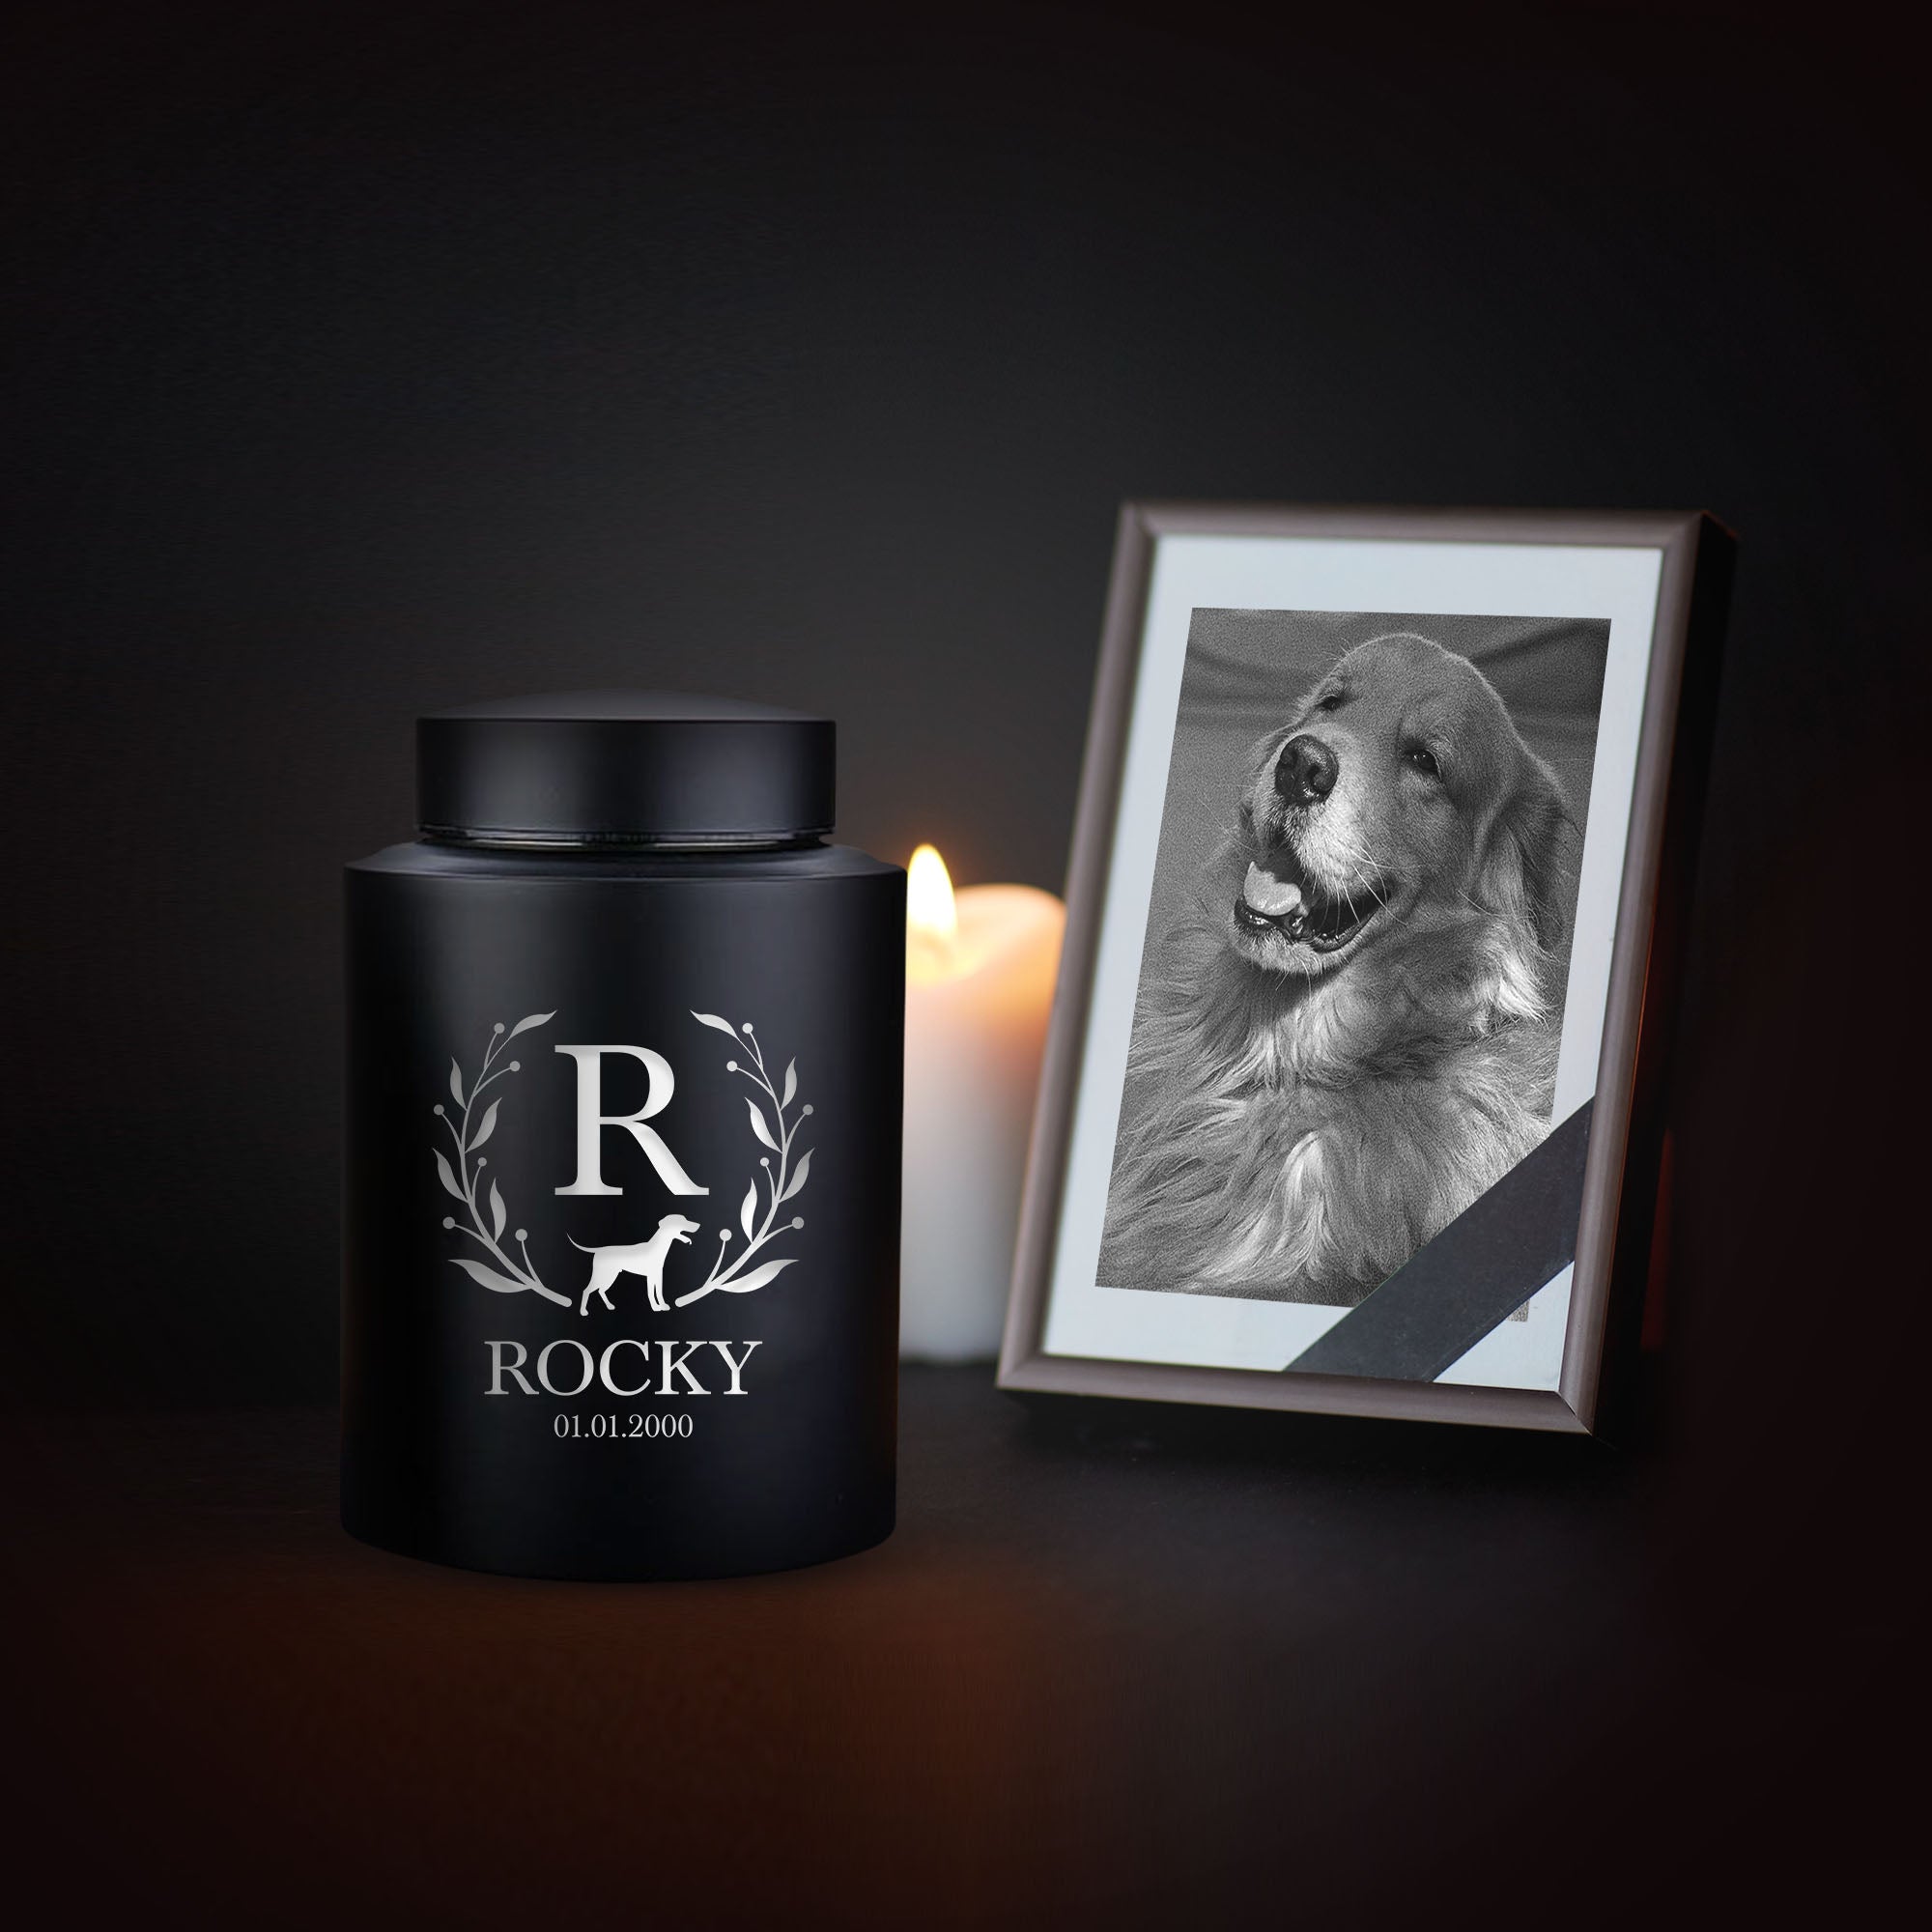 Personalized Custom Pet Dog Cremation Urn Engraved with Name, Date and Text - Round Powder Coated Steel Standard Size Urns for Dogs Ashes, Pet Size 30-50lbs